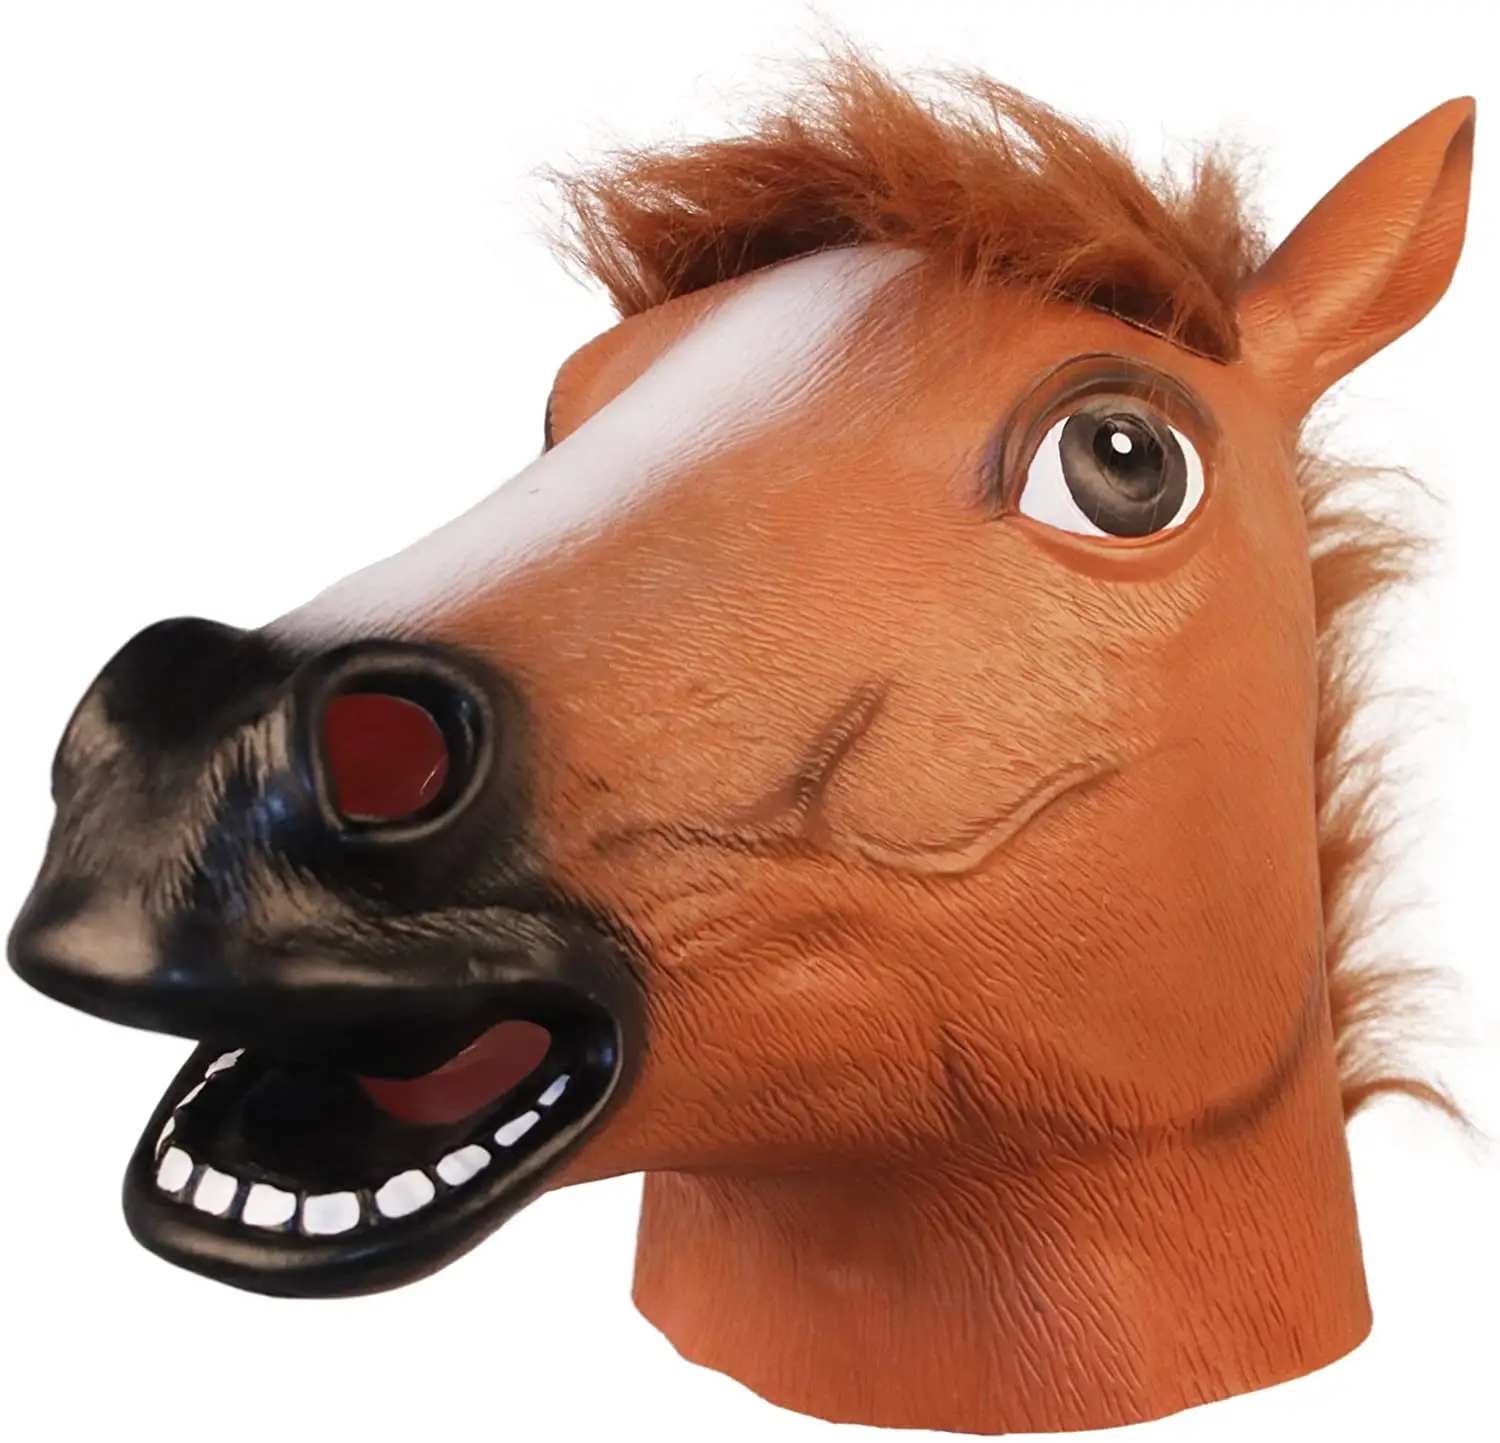 Horse Head Mask Creepy Brown Horse Head Rubber Latex Animal Mask,Novelty Halloween Costume Party